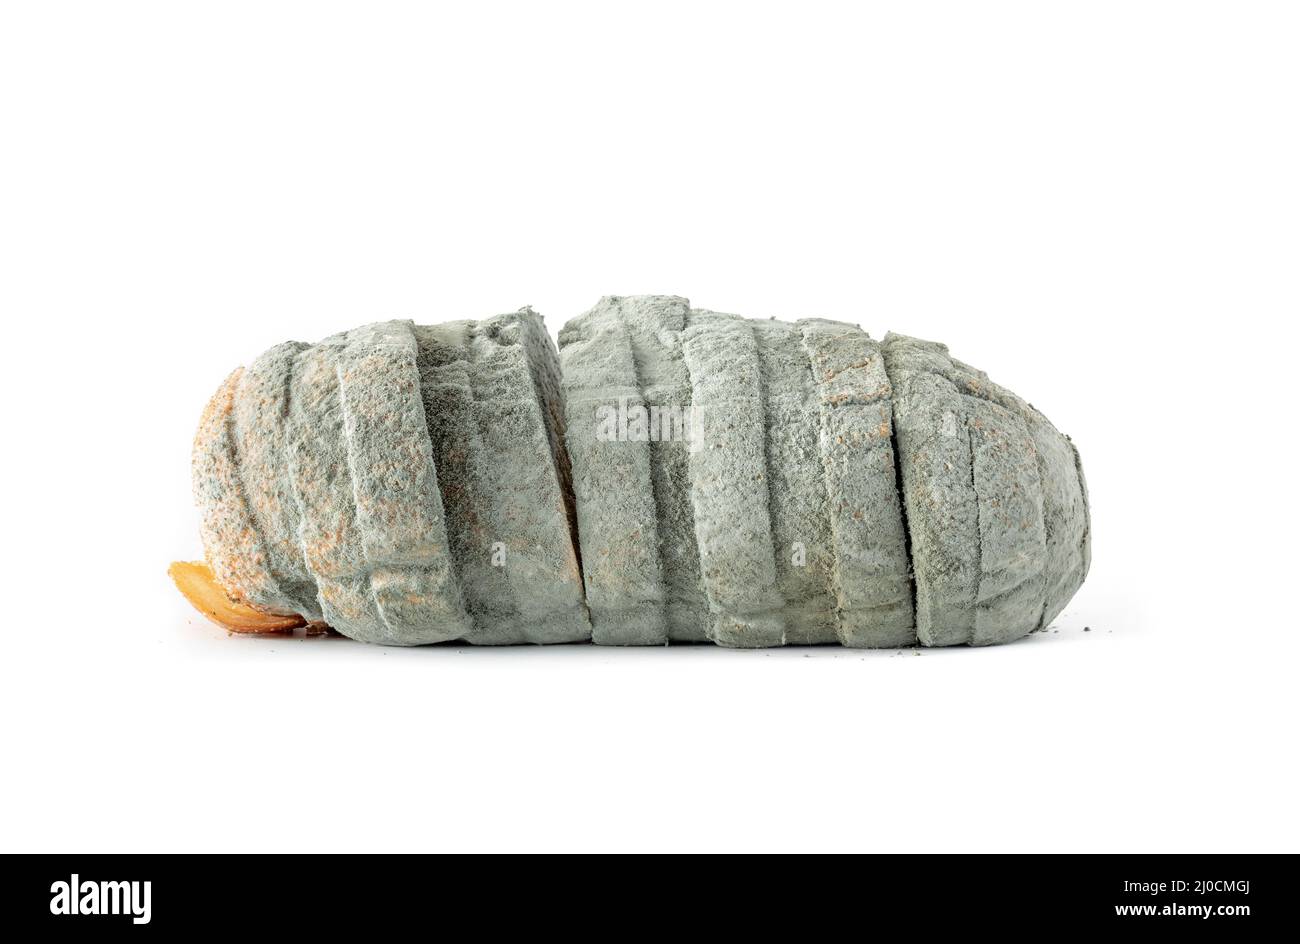 Isolated moldy bread loaf. Entire loaf of bread covered with fuzzy green, blue or greyish mold fungus spores or mildew. Concept for spoiled food, rott Stock Photo